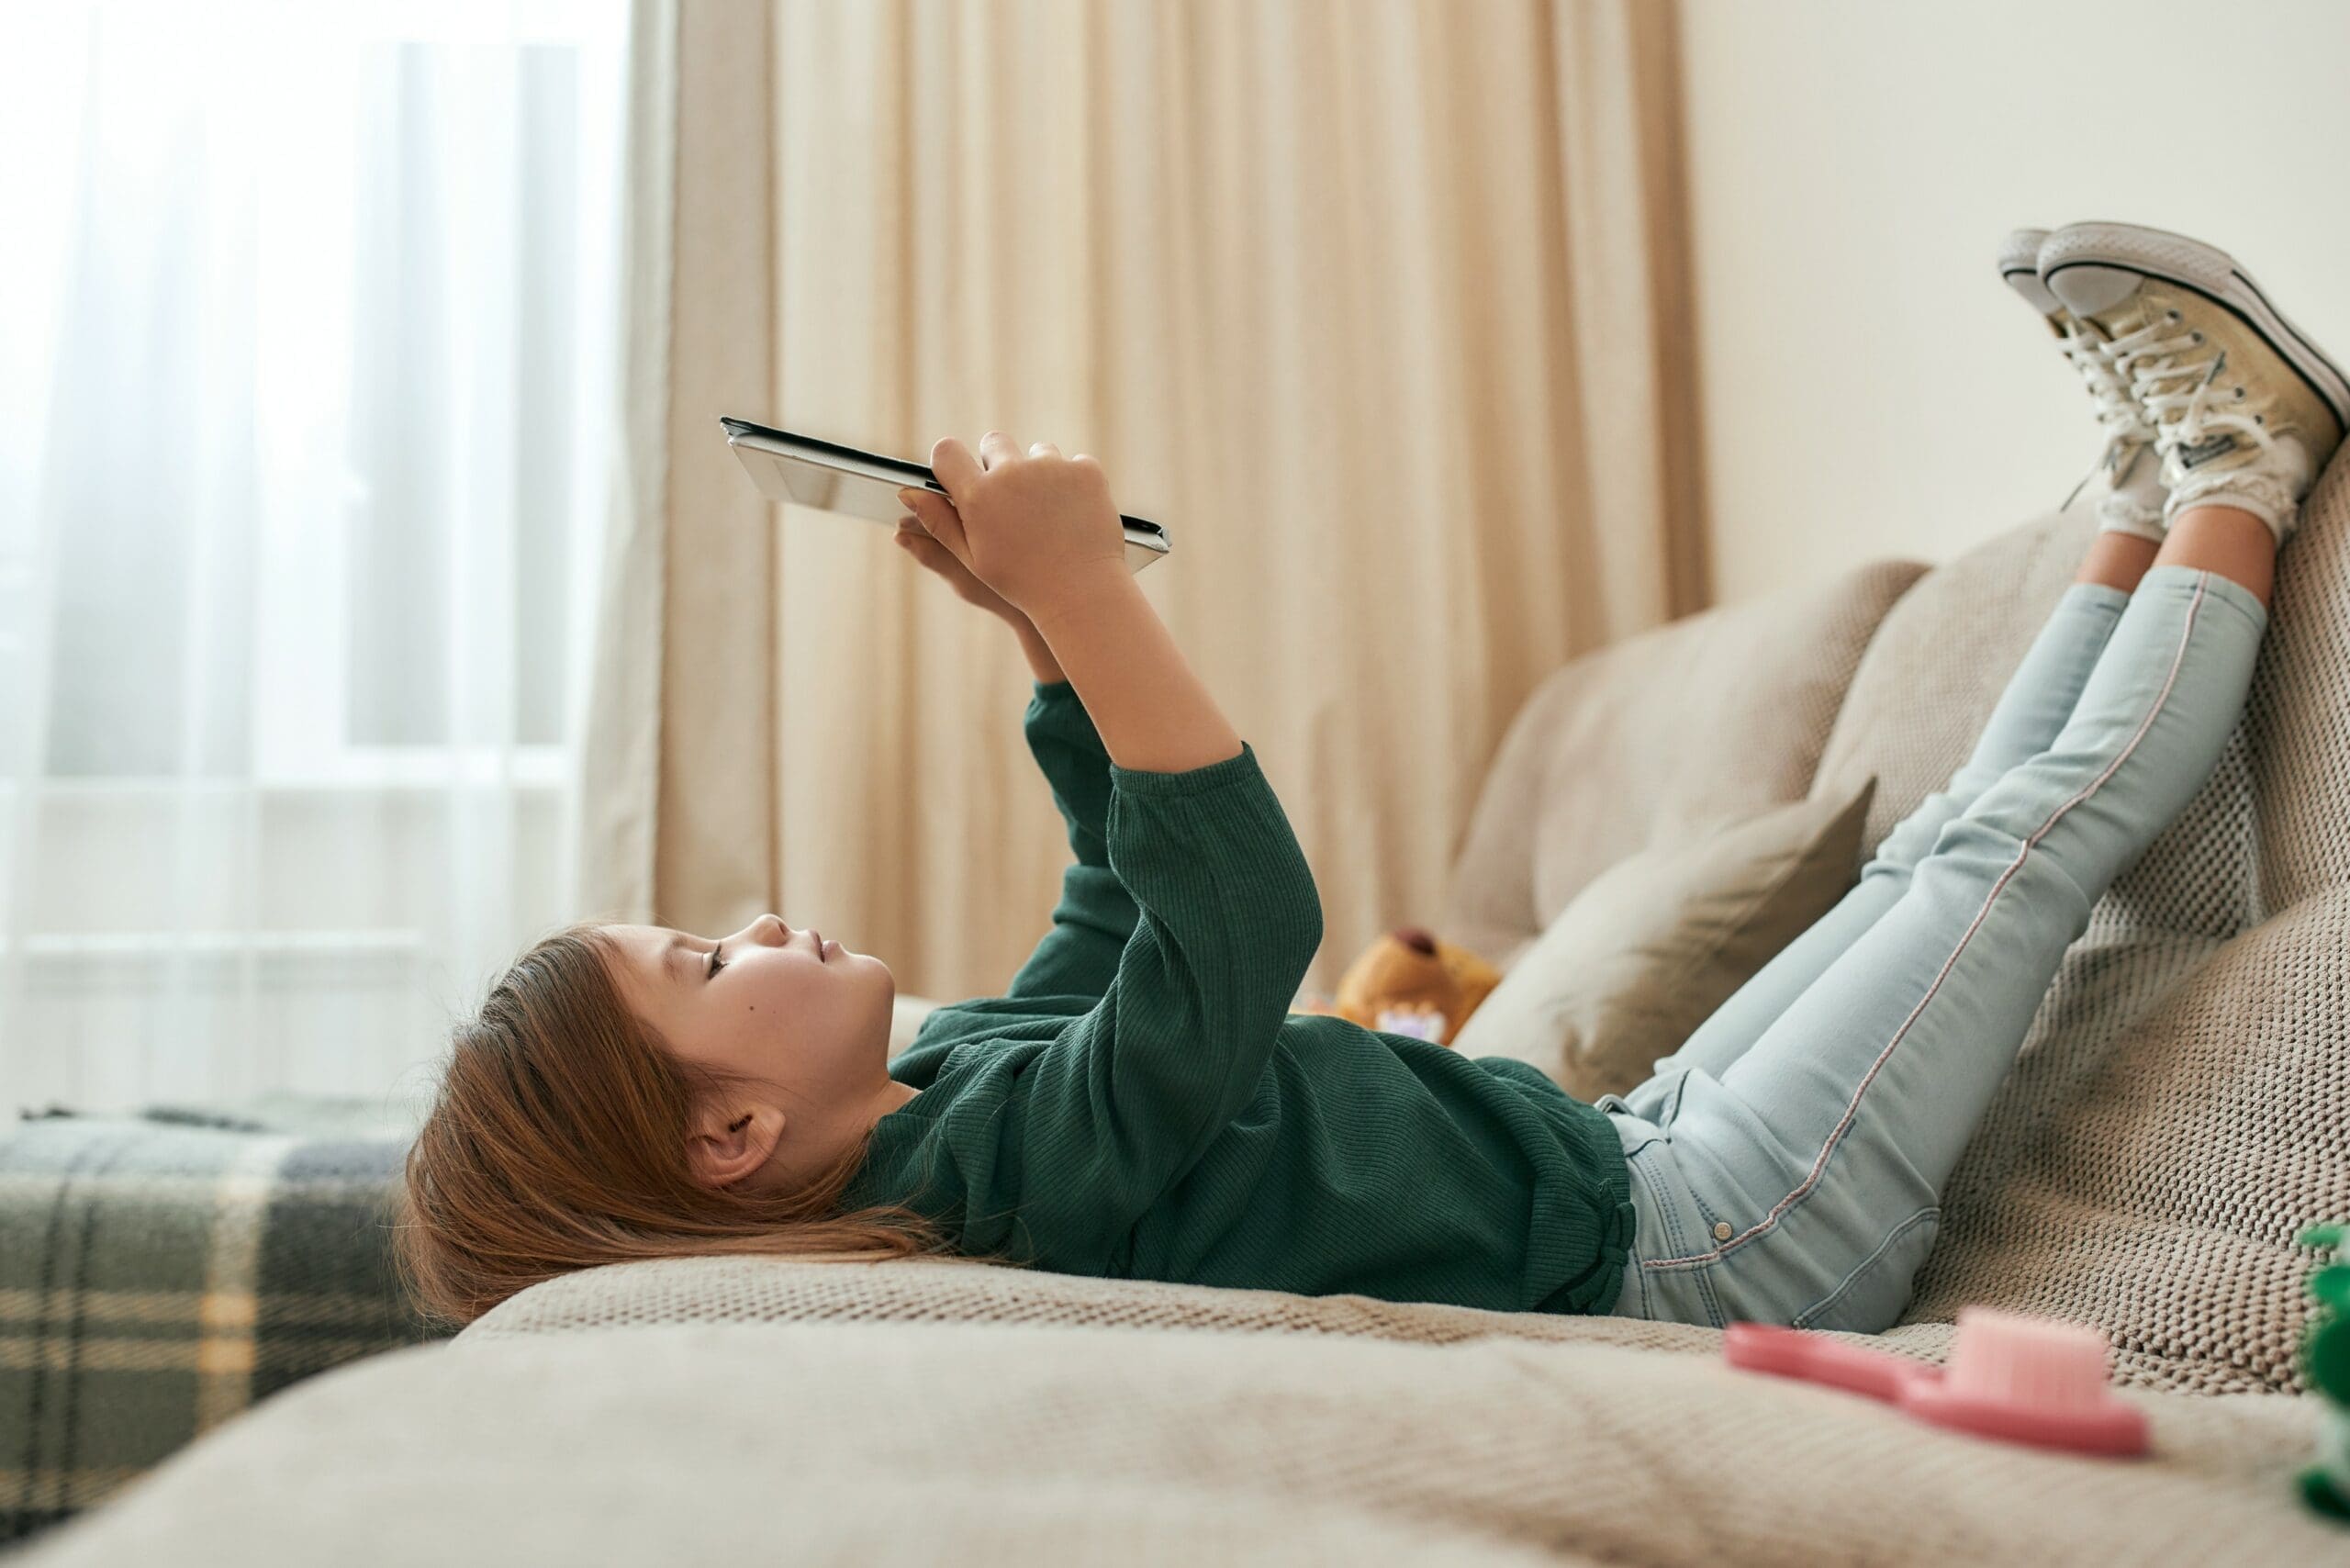 Should we be concerned around kids and screen time?